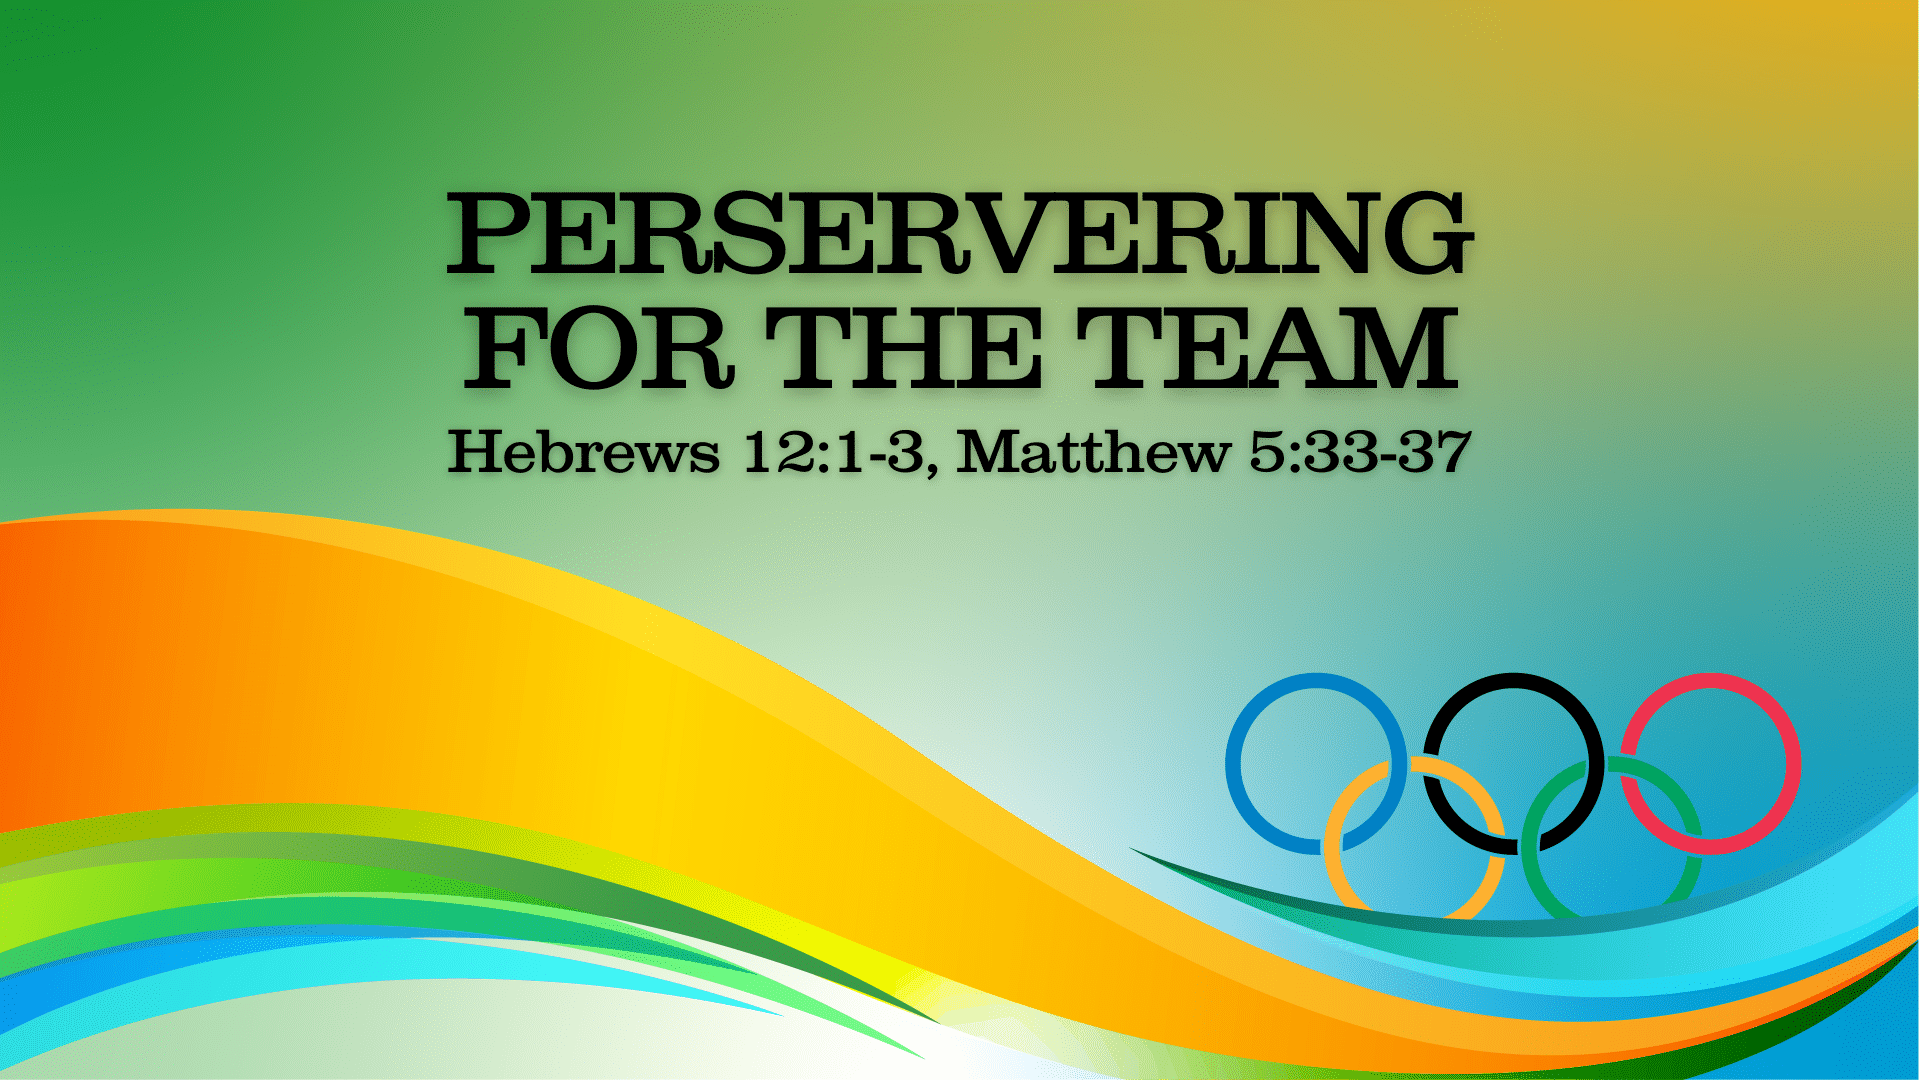 Go For The Gold: Perservering For The Team